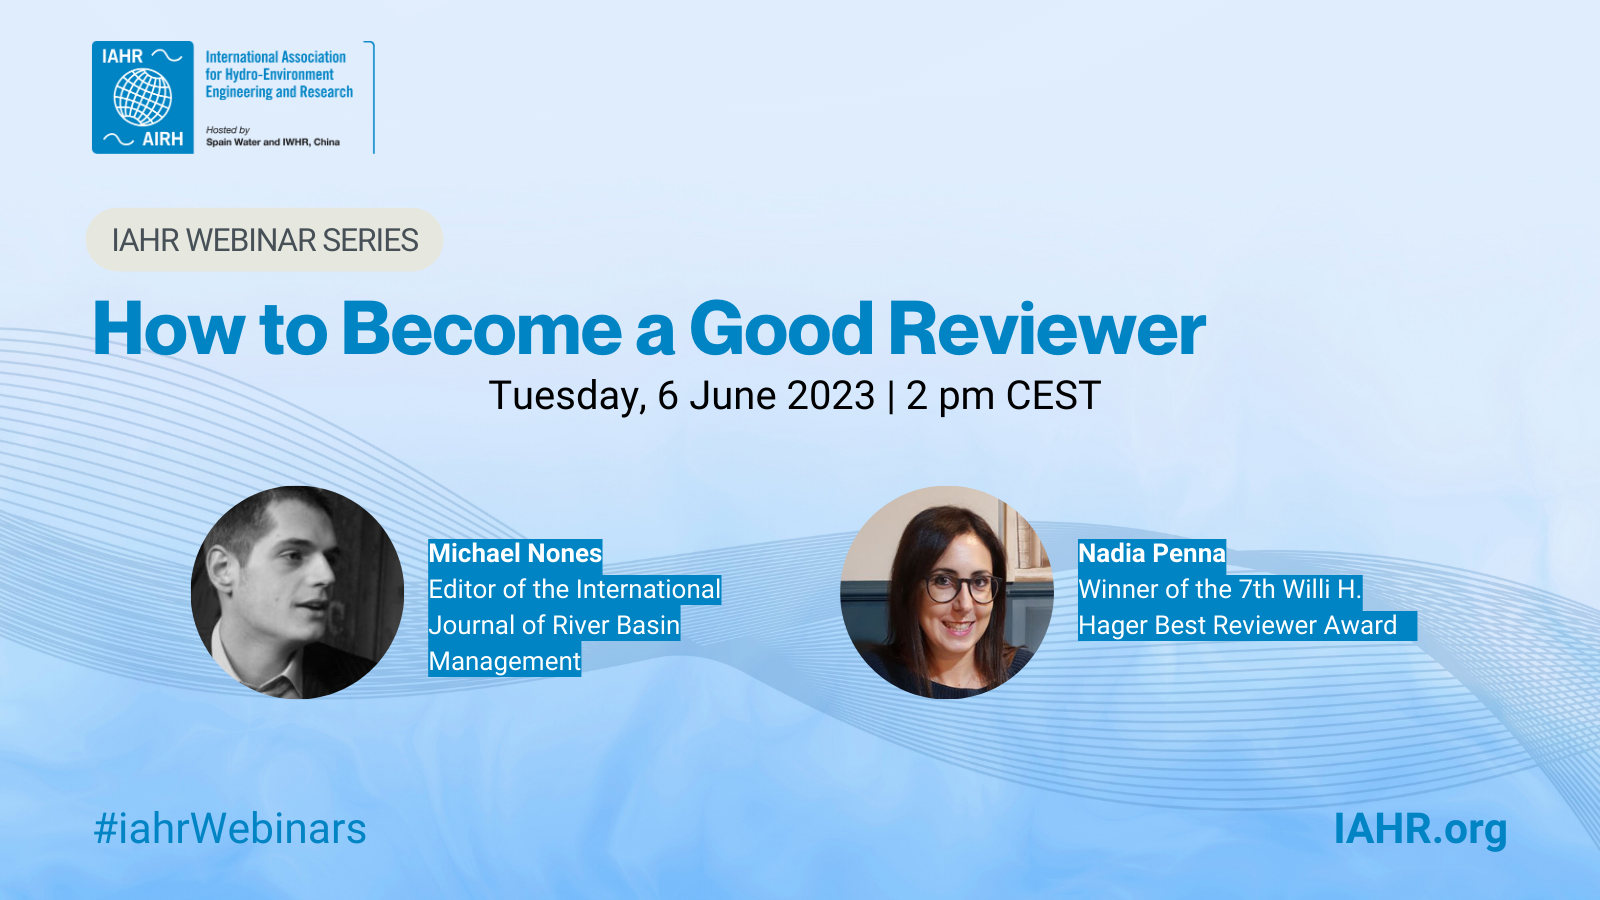 Highlights: IAHR Webinar | How to Become a Good Reviewer